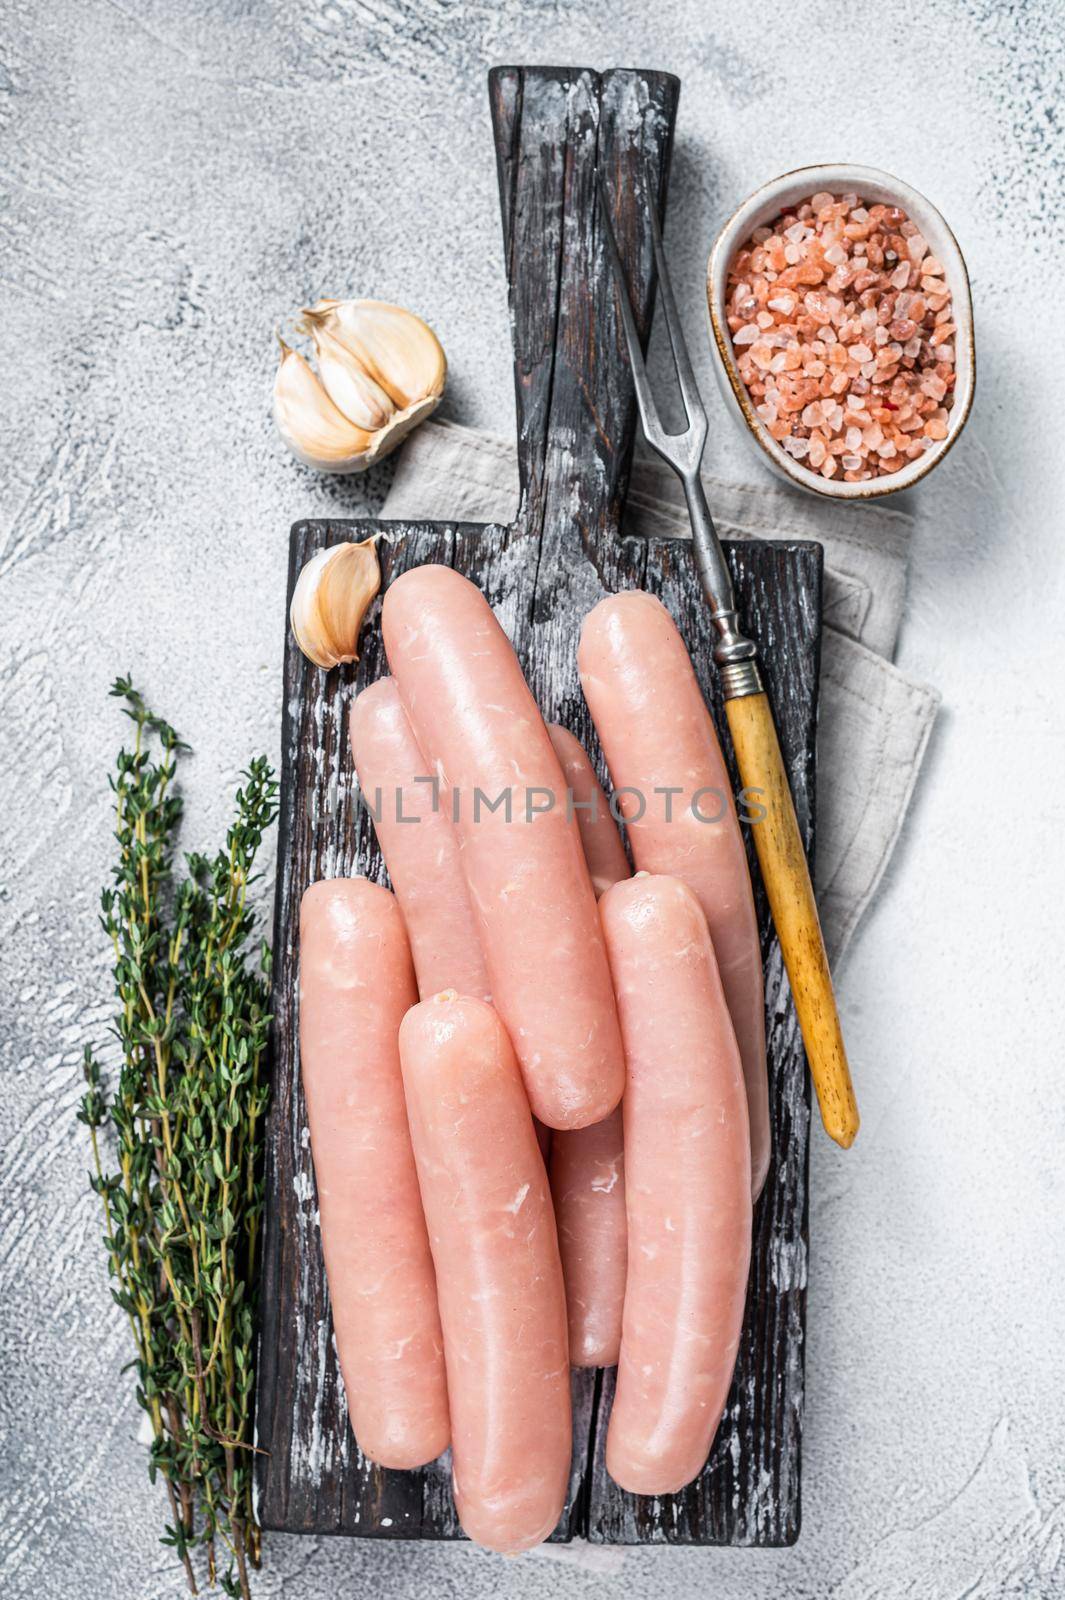 Chicken and turkey meat raw sausages on a wooden board with thyme. White background. Top view by Composter